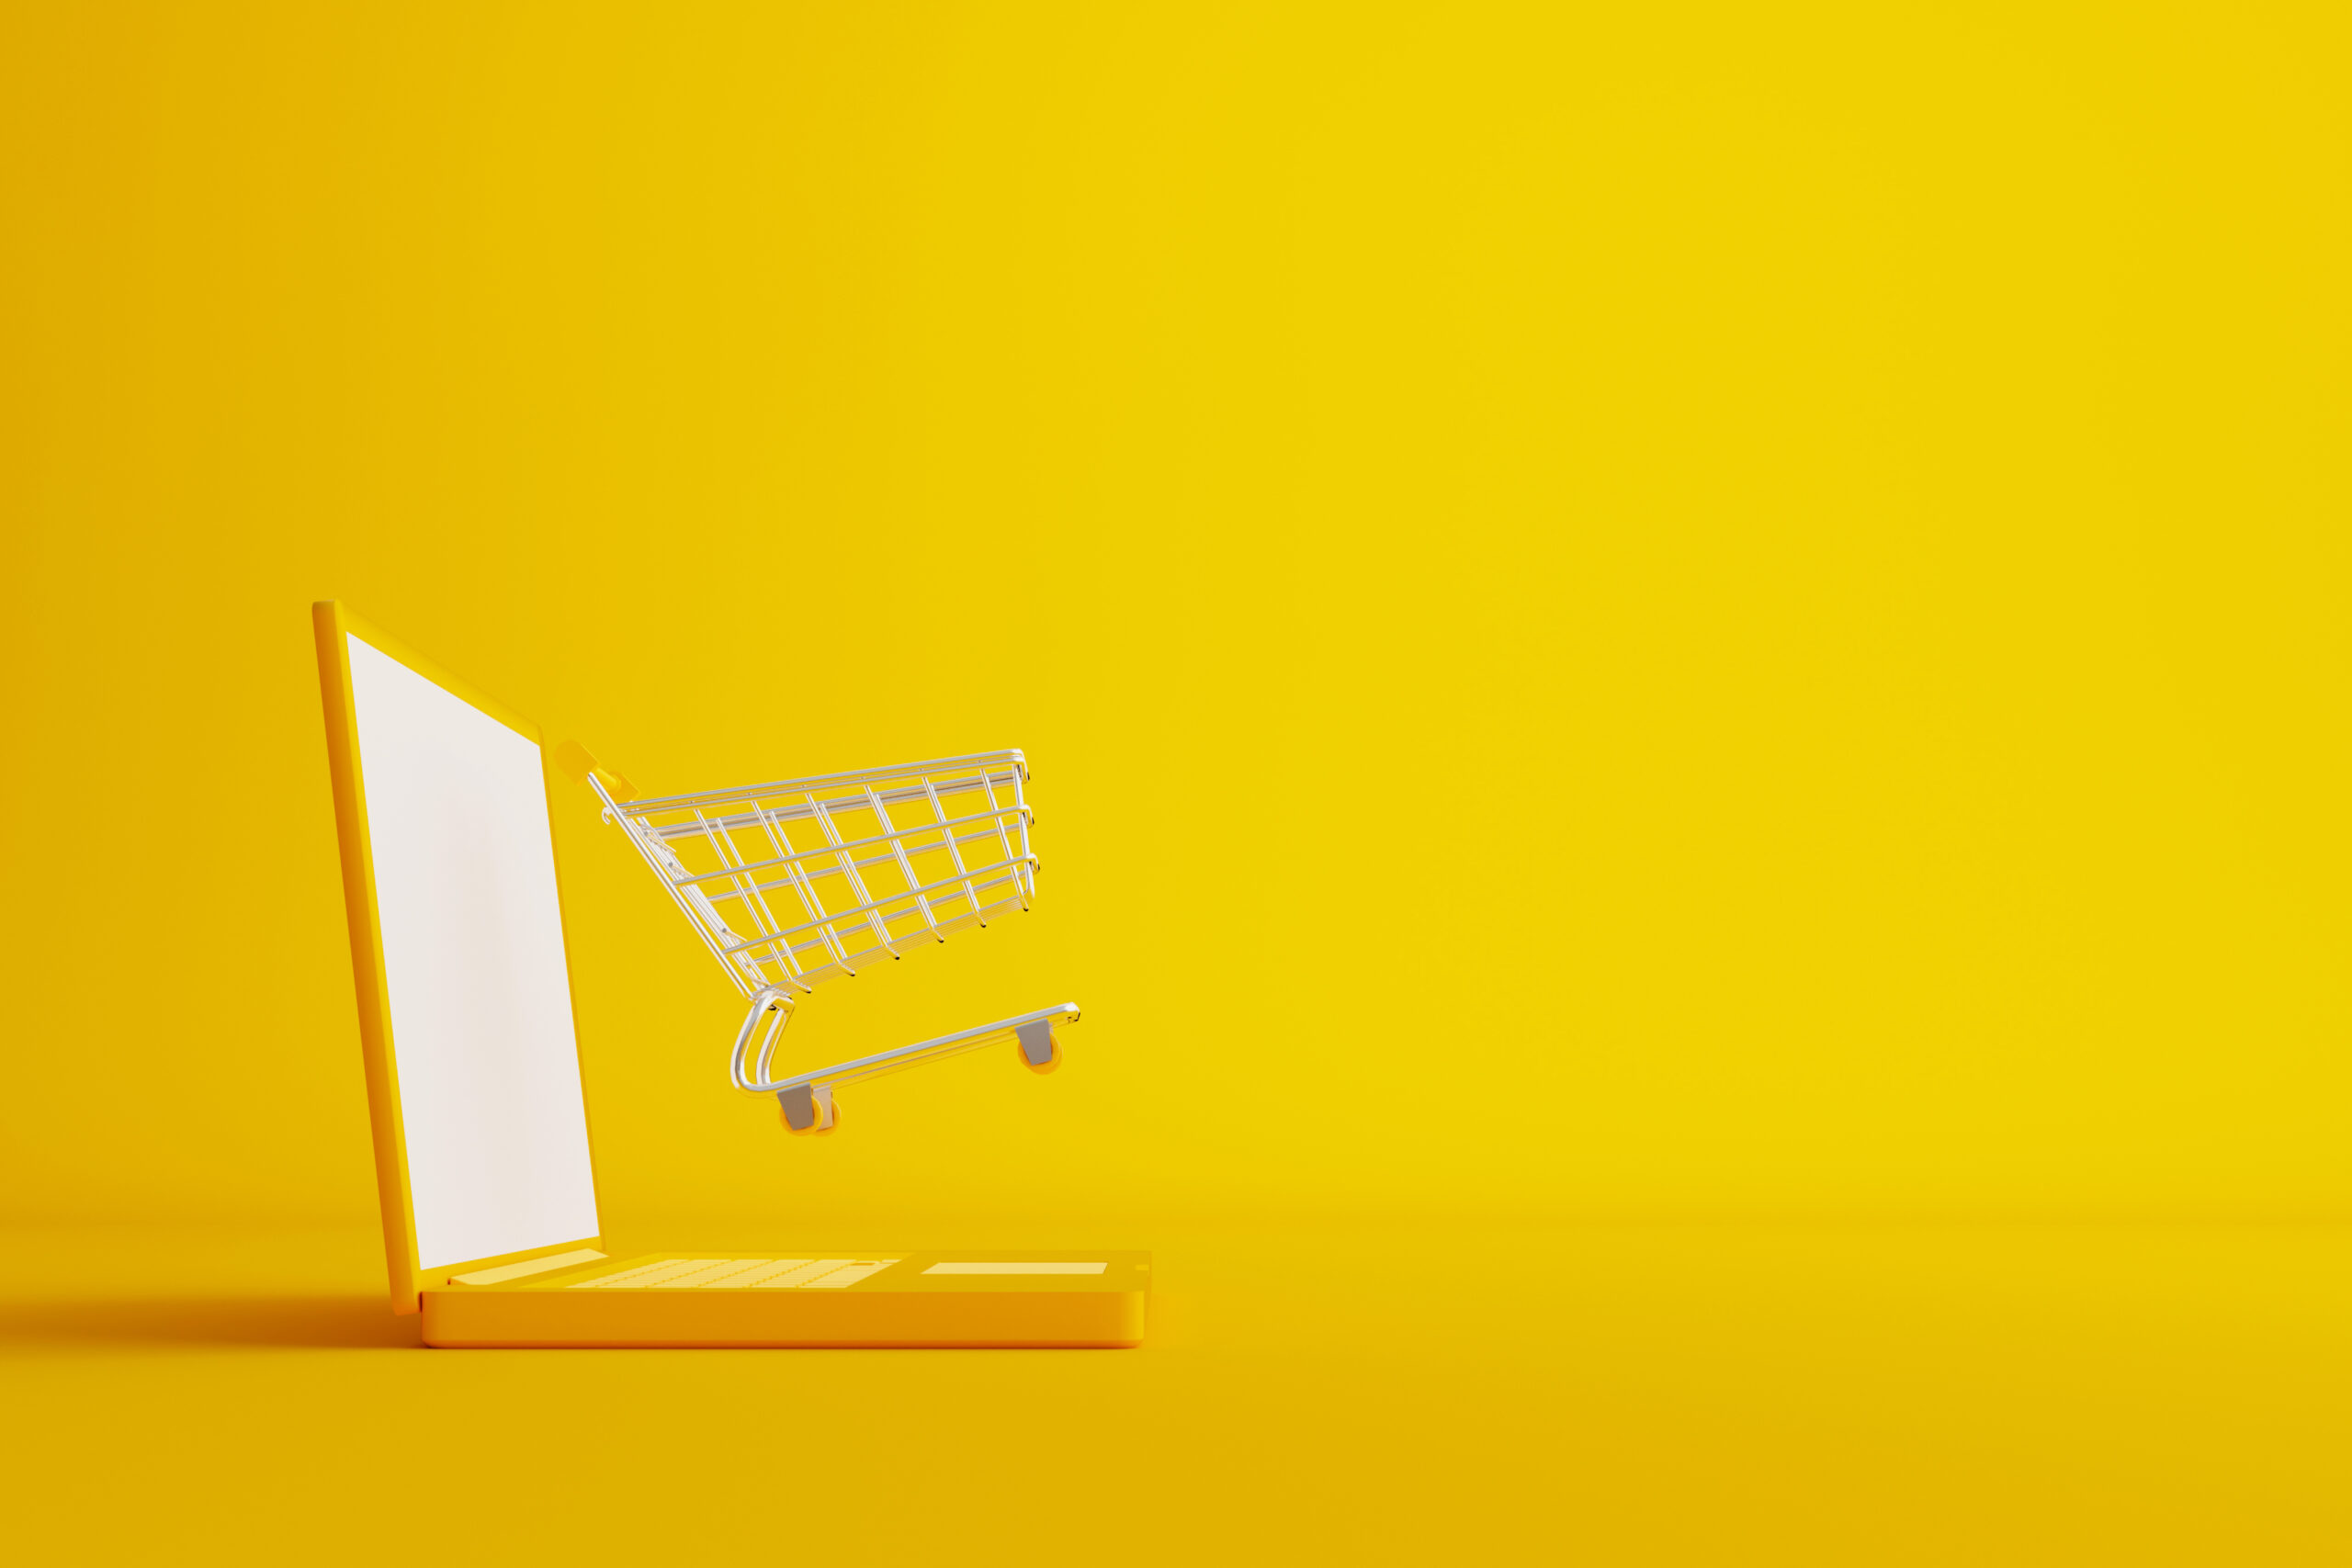 Online shopping and ecommerce concept. Web or mobile application e-commerce. Computer laptop with shopping cart on yellow background. 3d rendering illustration